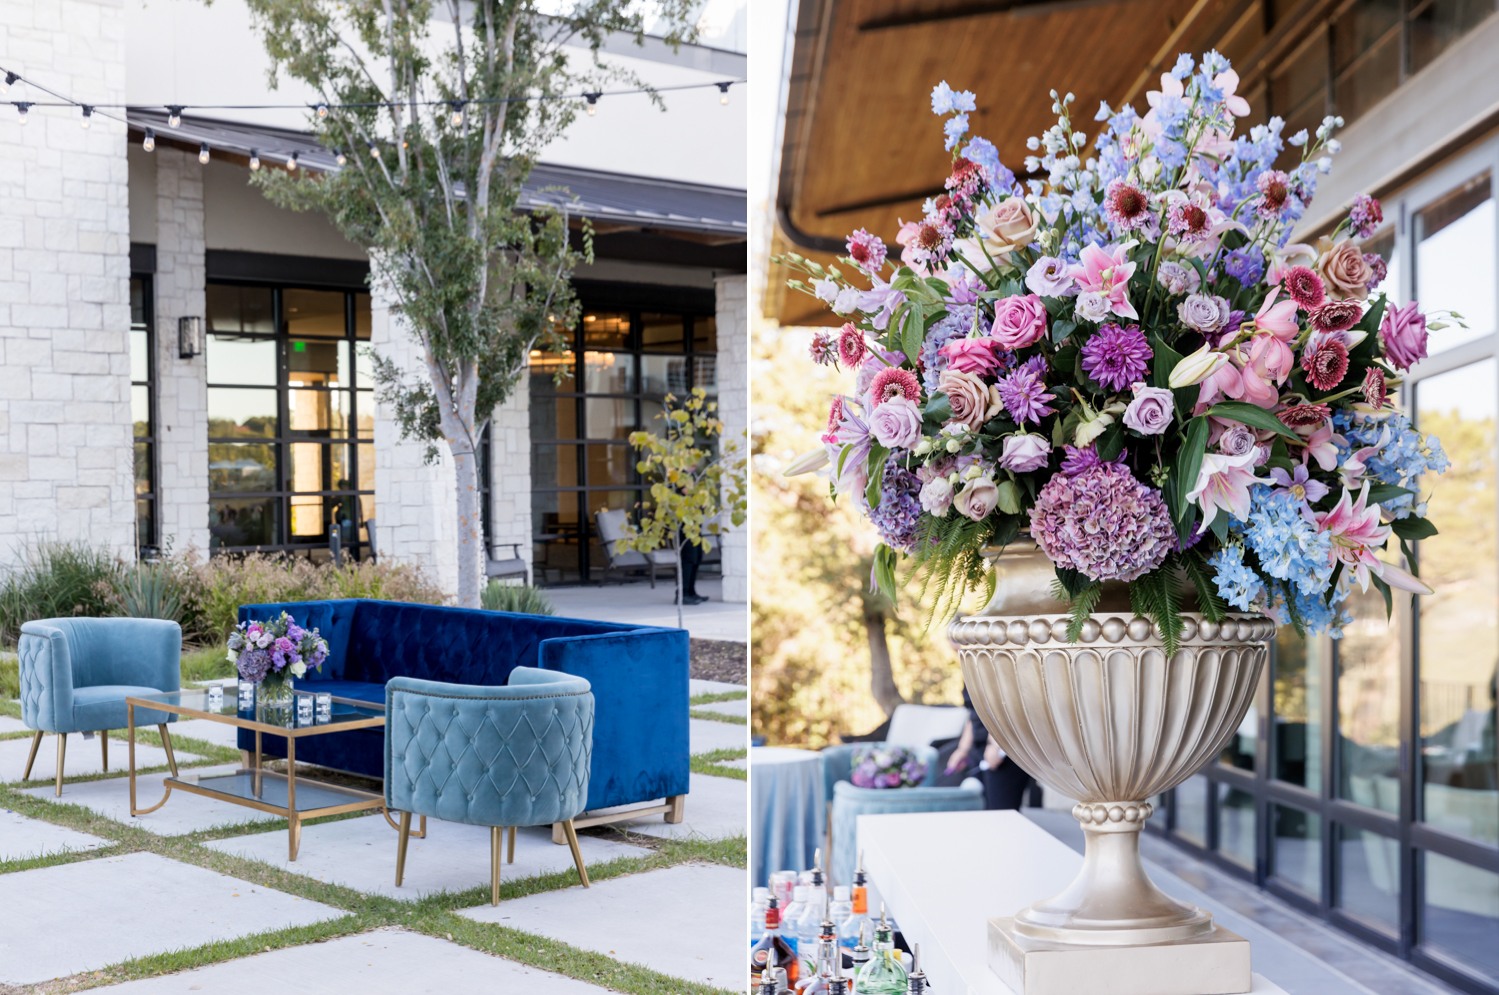 Left: Blue velvet chair and couch rentals sit outside the reception. Right: A close up of the large outdoor flower arrangements full of blue, purple, and pink flowers